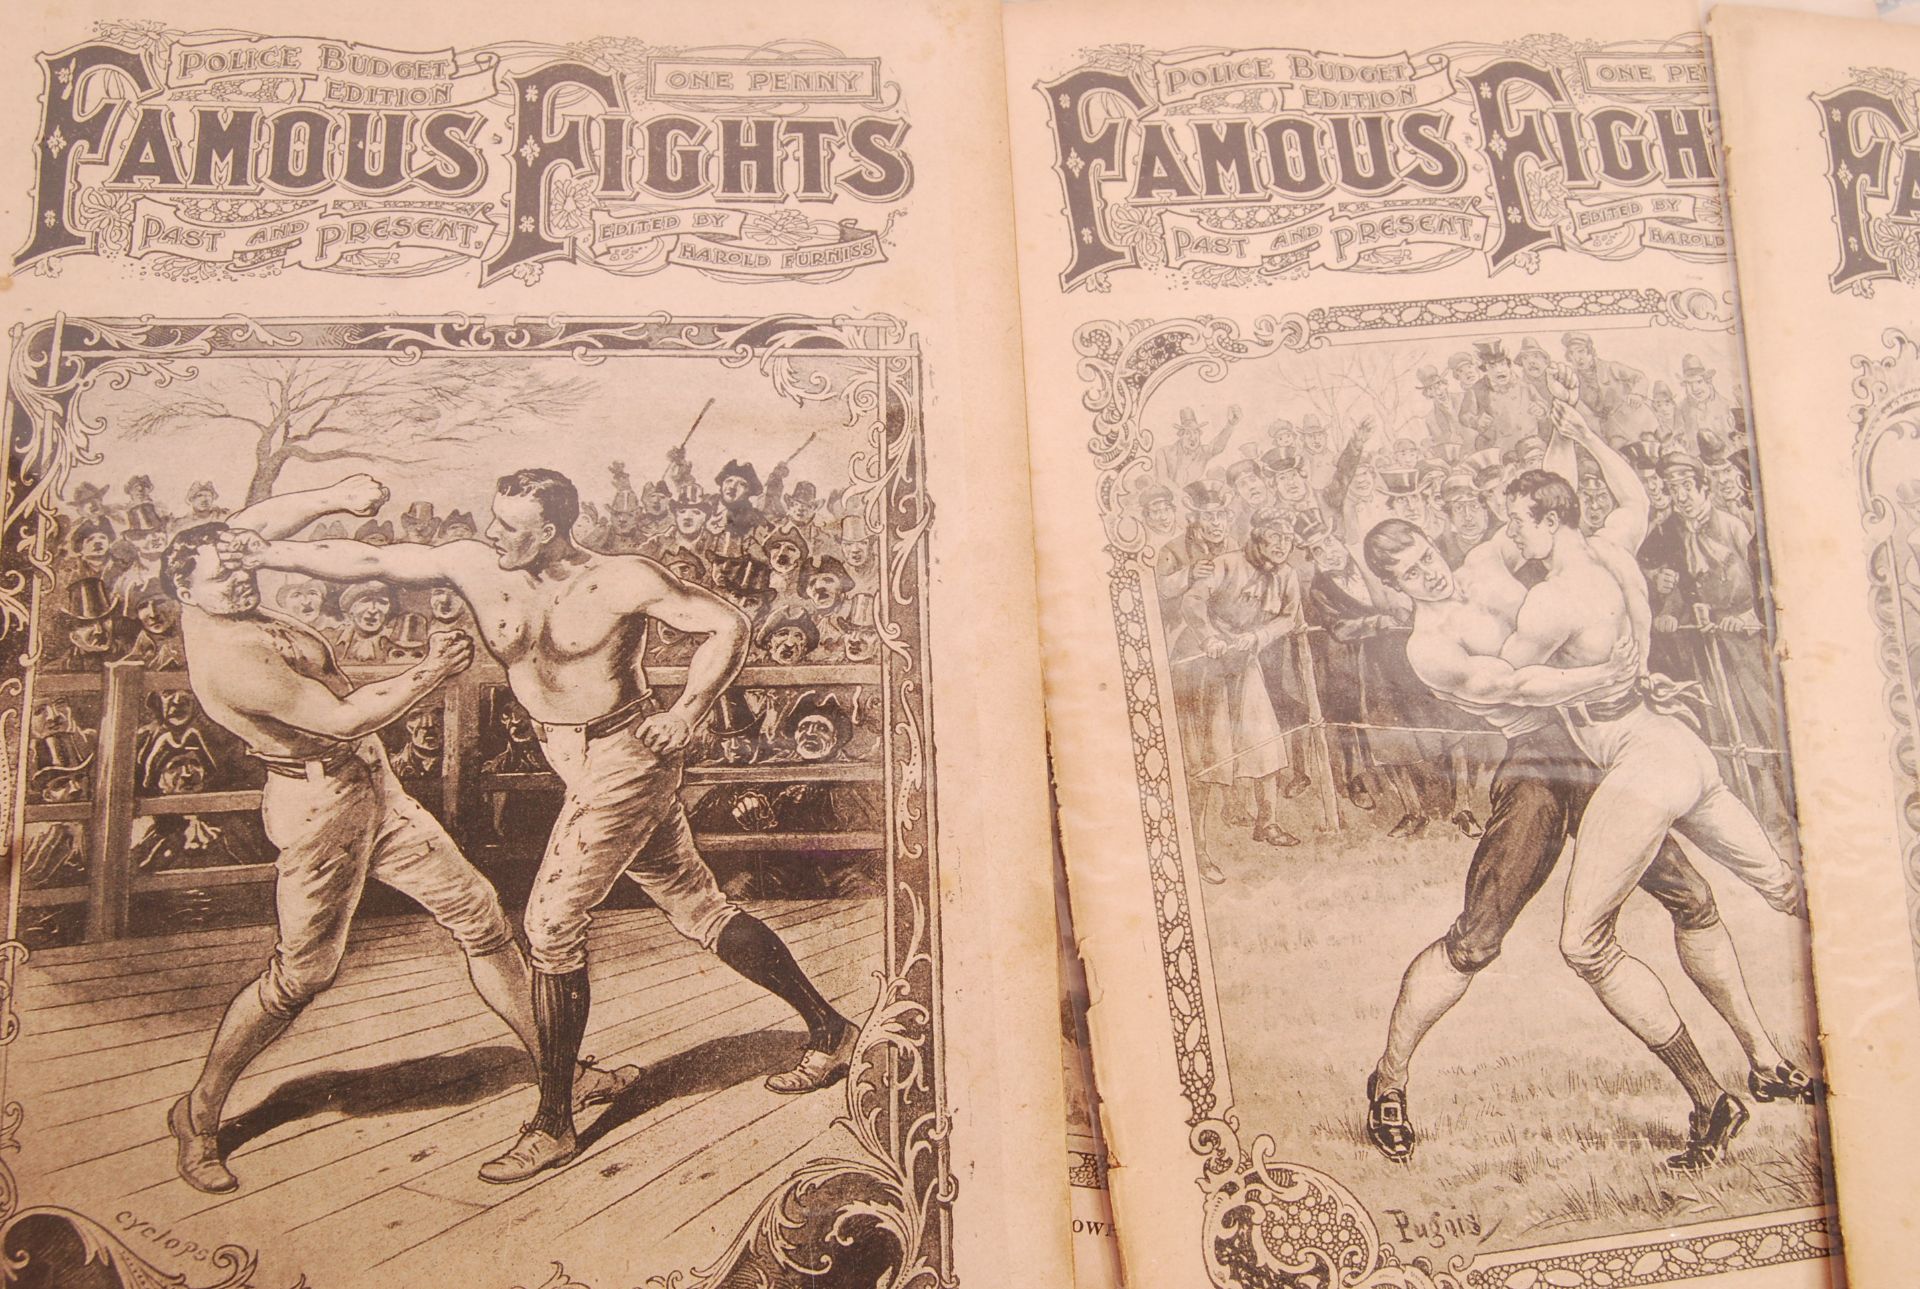 COLLECTION OF EDWARDIAN FAMOUS FIGHTS MAGAZINES - Image 4 of 4